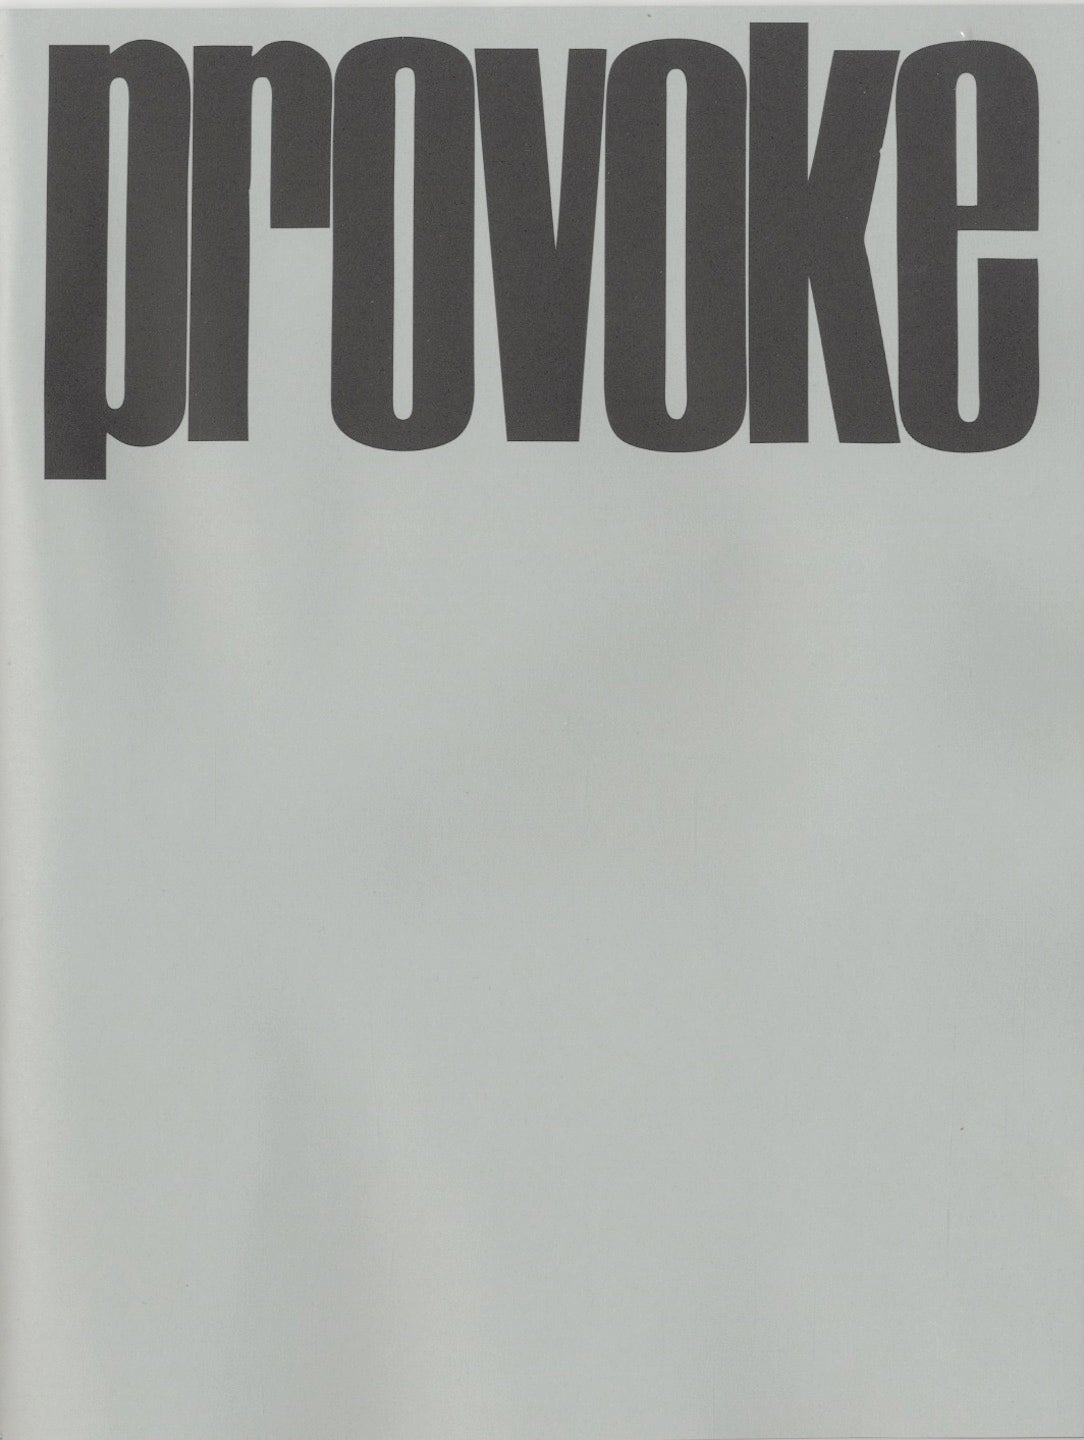 PROVOKE (Provocative Materials for Thought): Complete Reprint of 3 Volumes (NITESHA Reissue) [Volume 2 SIGNED by Daido Moriyama]